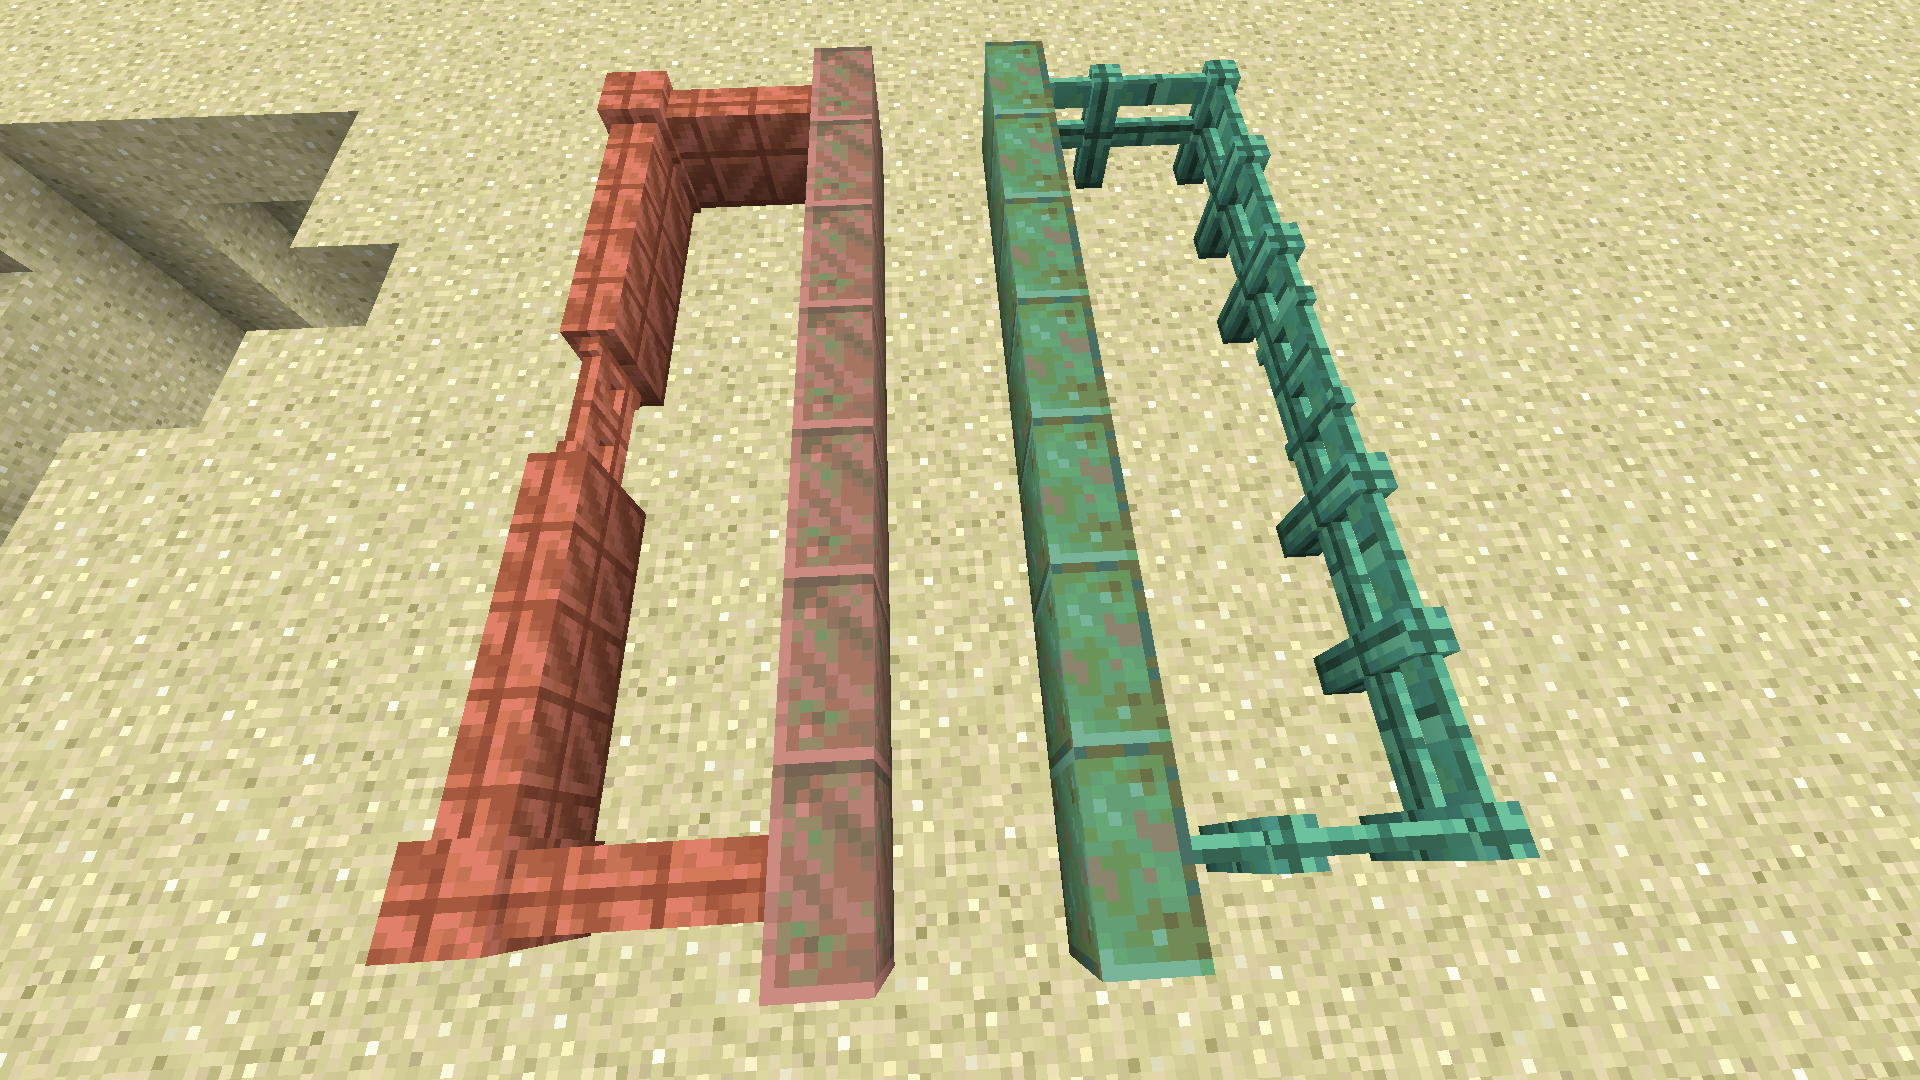 Extended block shapes - Minecraft Mod